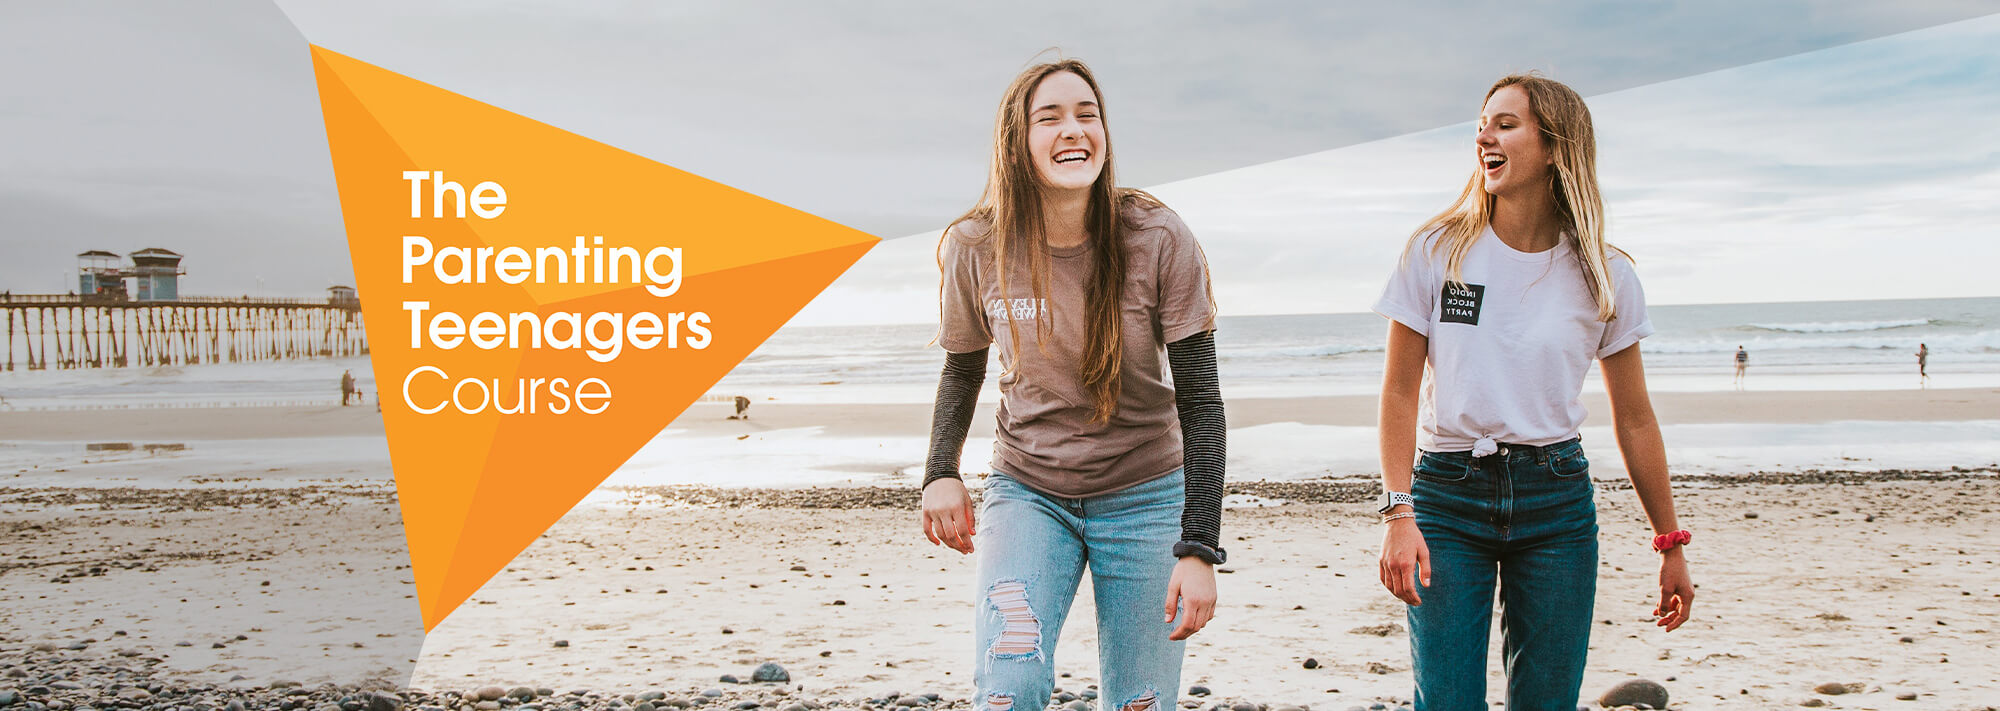 The Parenting Teenagers Course | KingsGate Community Church